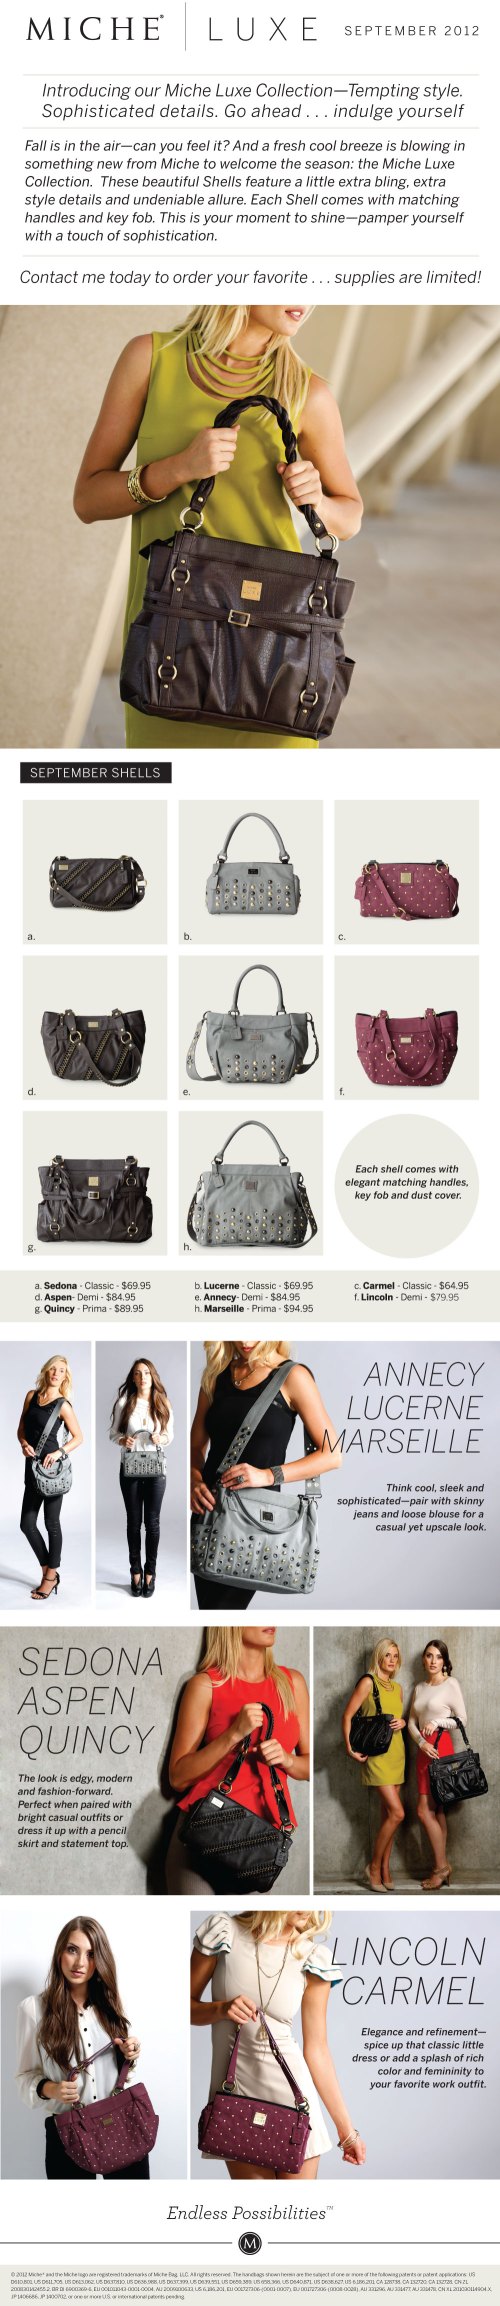 Miche Luxe Line Available September 1st! LIMITED SUPPLY!